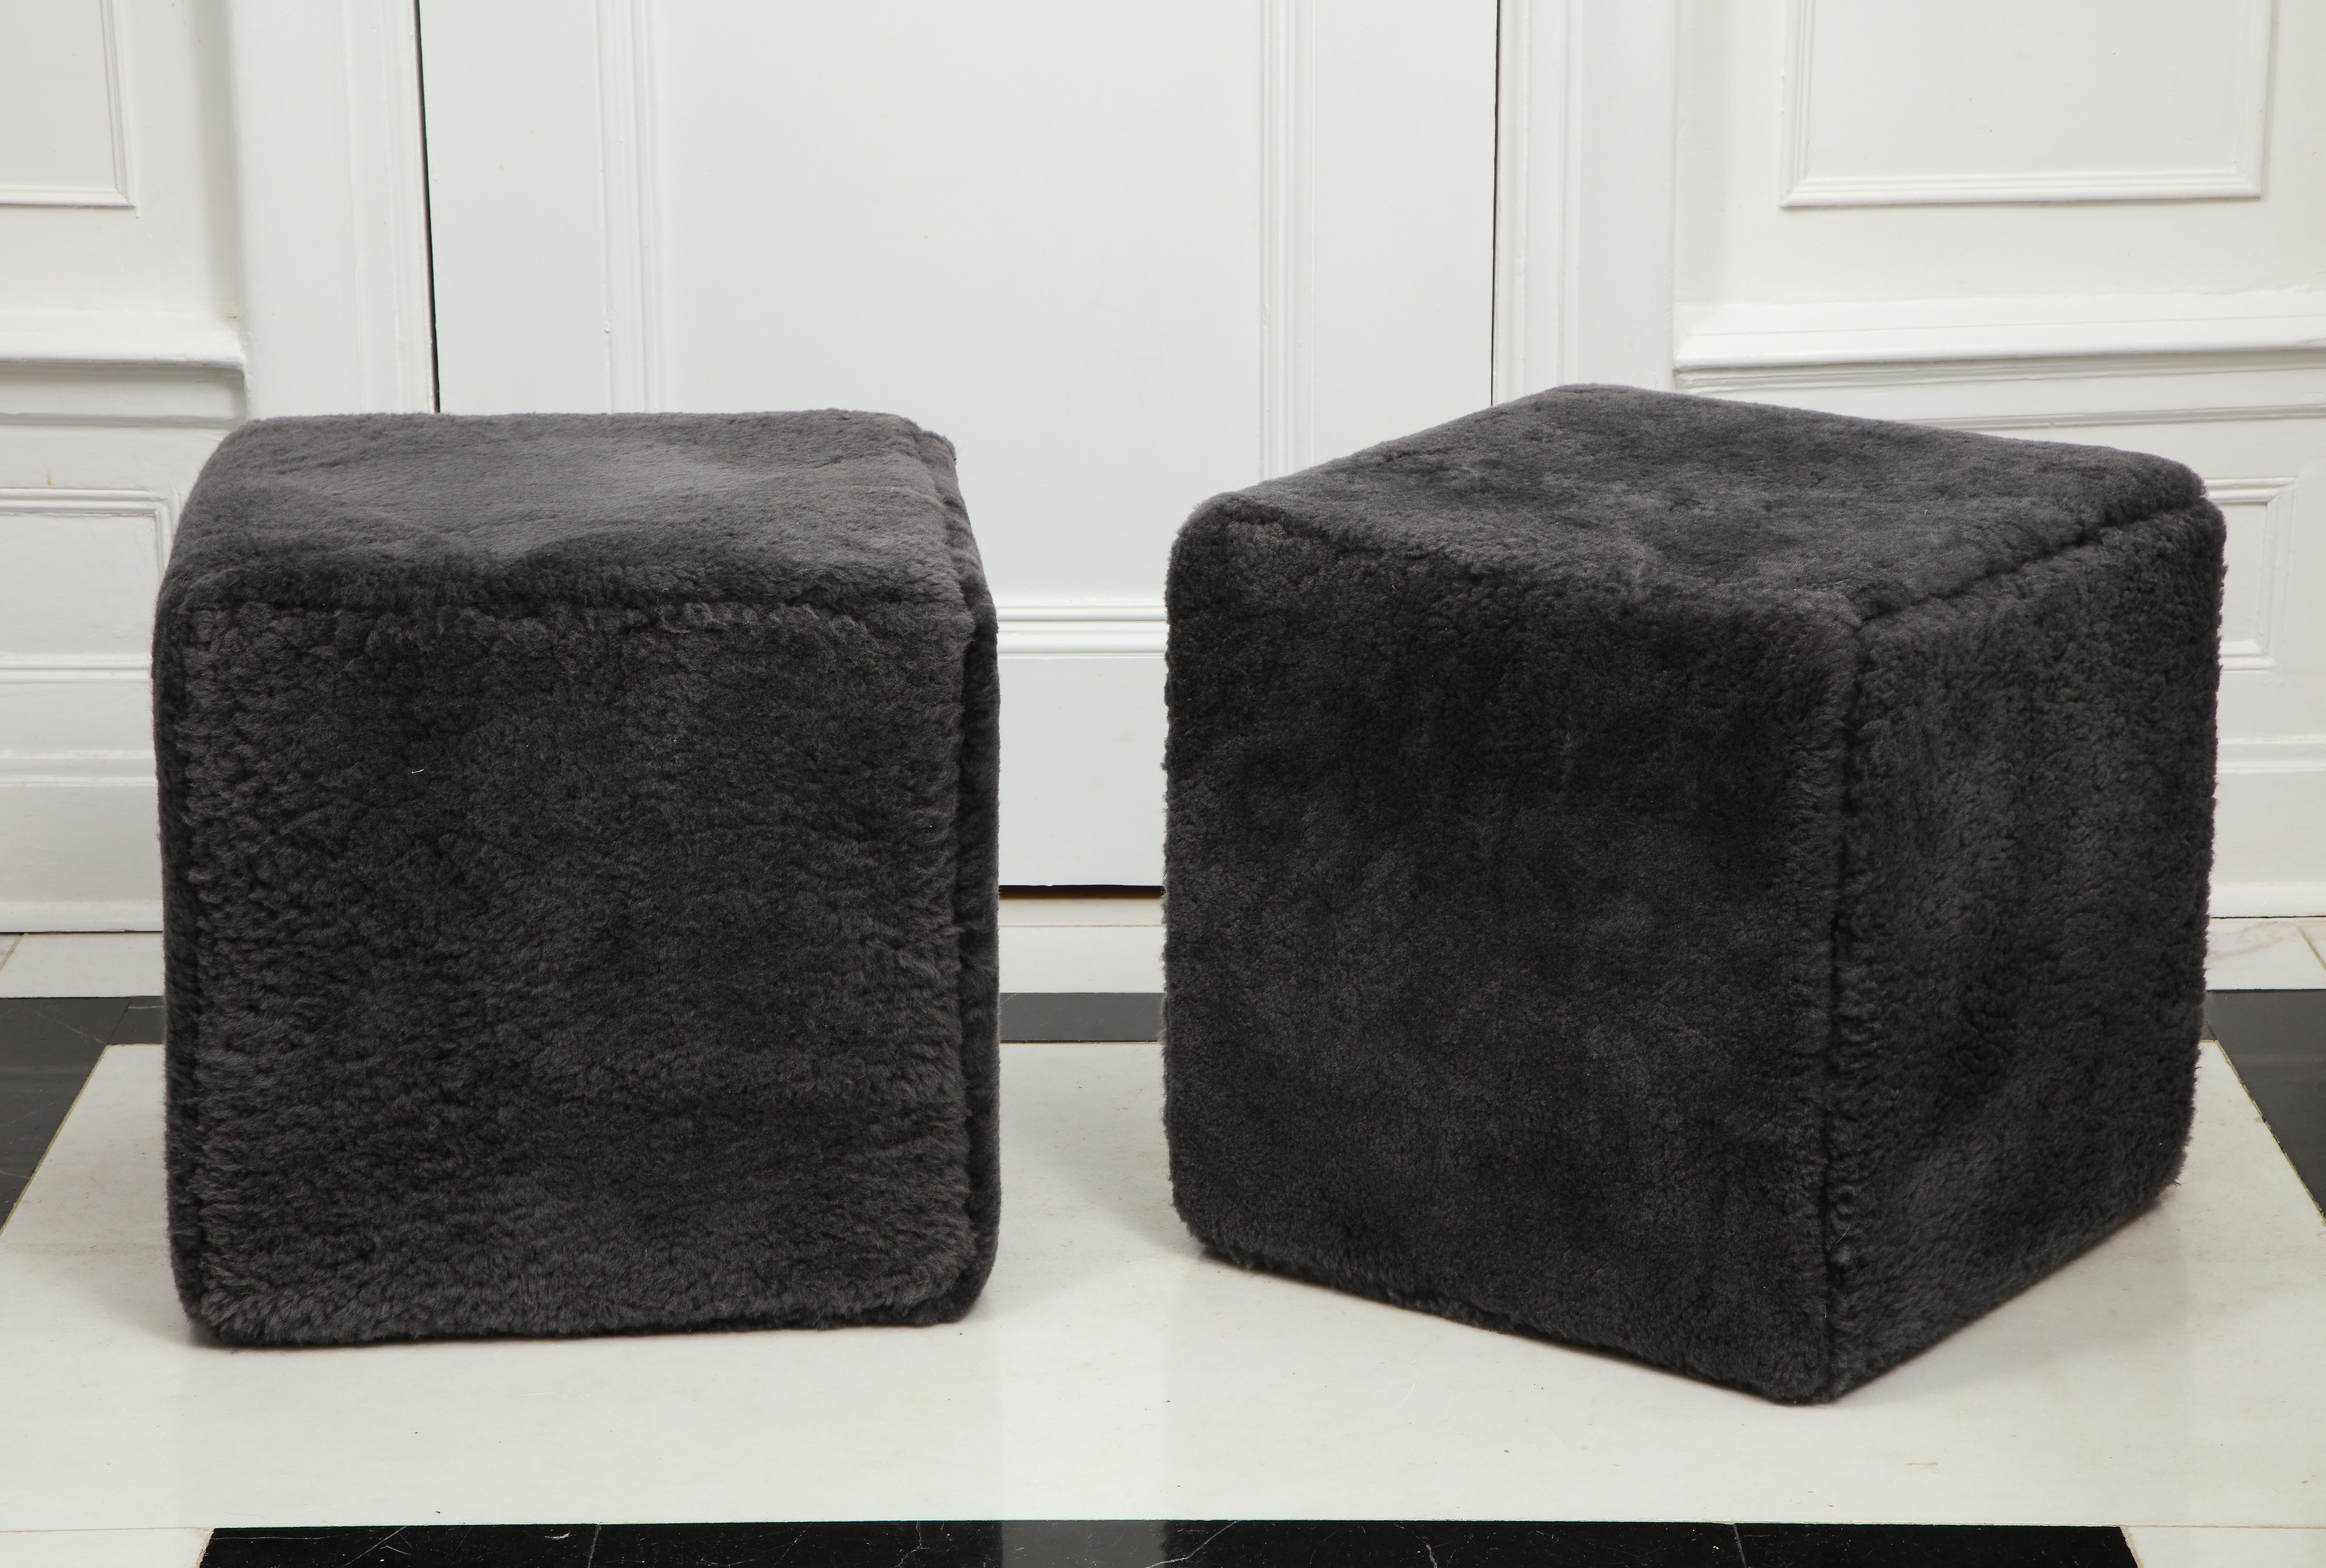 Pair of custom shearling cube ottomans/footstools designed by Venfield. The pair shown in the photos are in black color. Custom options are available for different sizes and shearling colors.